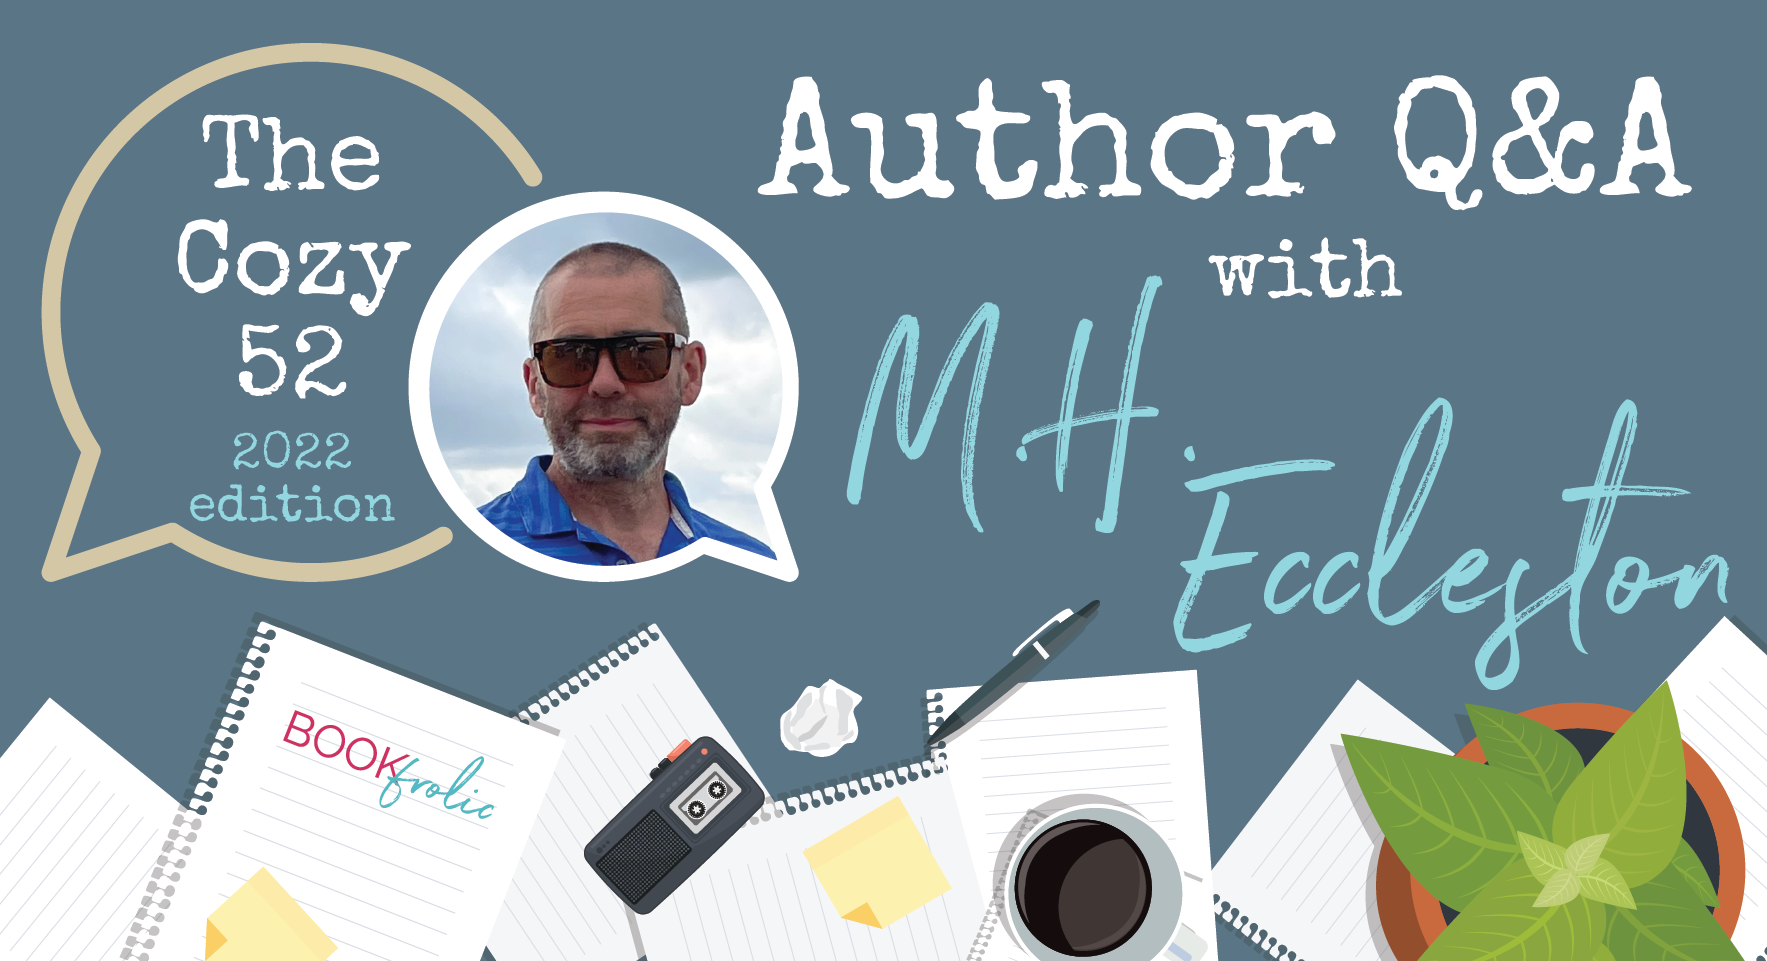 banner for MH Eccleston - The Cozy 52 interview